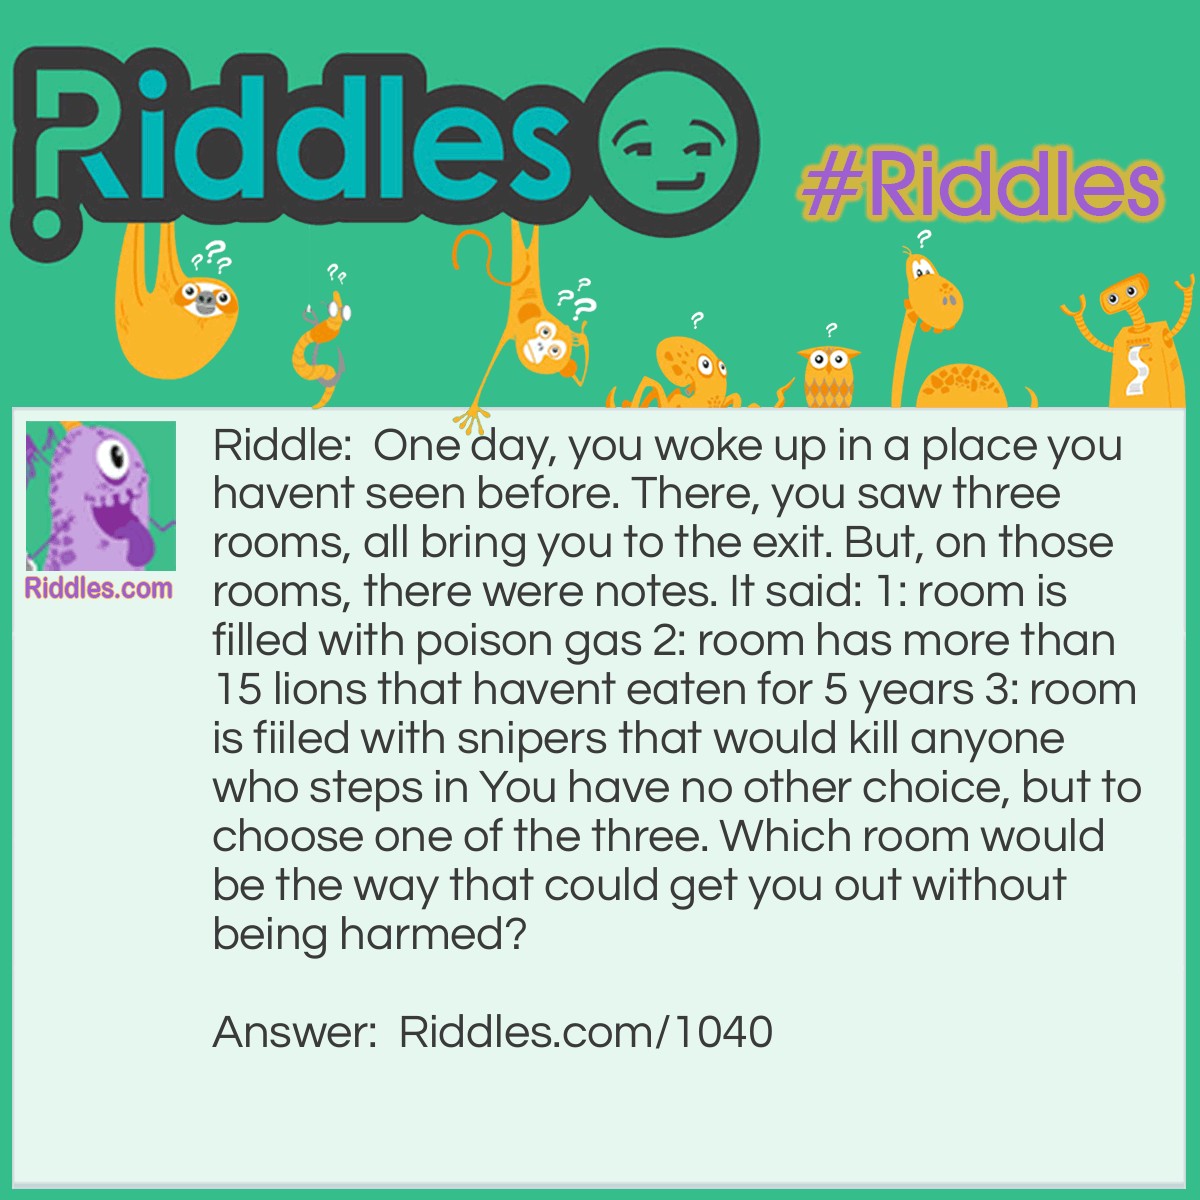 Riddle: One day, you woke up in a place you haven't seen before. There, you saw three rooms, all bringing you to the exit. But, in those rooms, there were notes. It said: 1: the room is filled with poison gas 2: the room has more than 15 lions that haven't eaten for <a href="/riddles-for-kids">5 years</a> 3: the room is filled with snipers that would kill anyone who steps in You have no other choice, but to choose one of the three. Which room would be the way that could get you out without being harmed? Answer: 2. Because if the lions hadn't eaten for five years, they would be dead.